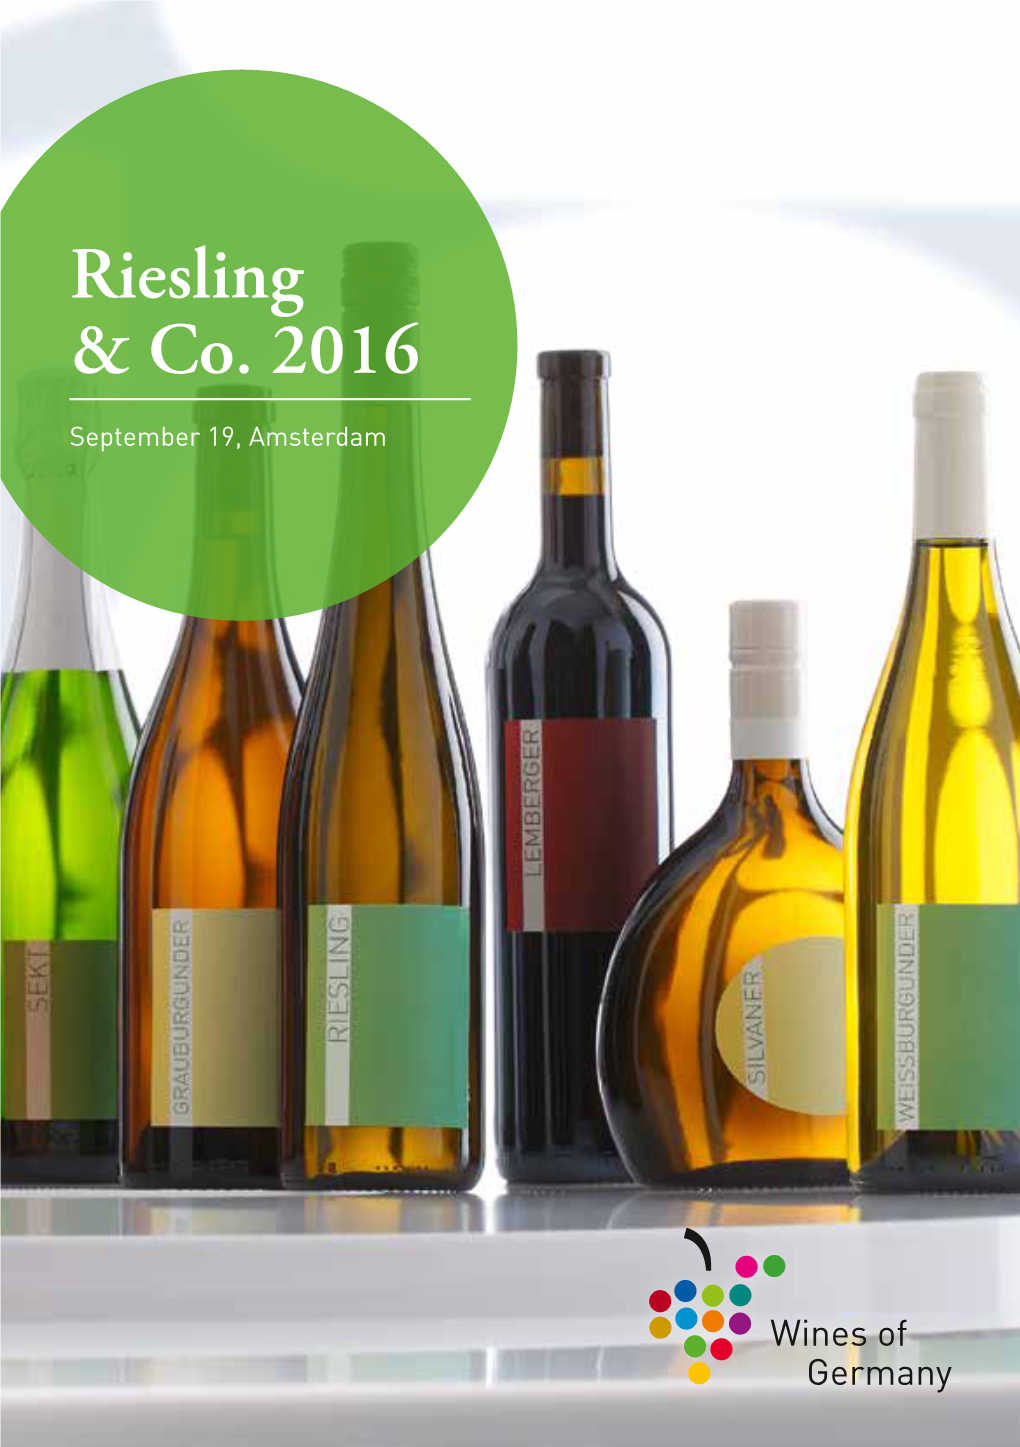 Riesling & Co. 2016